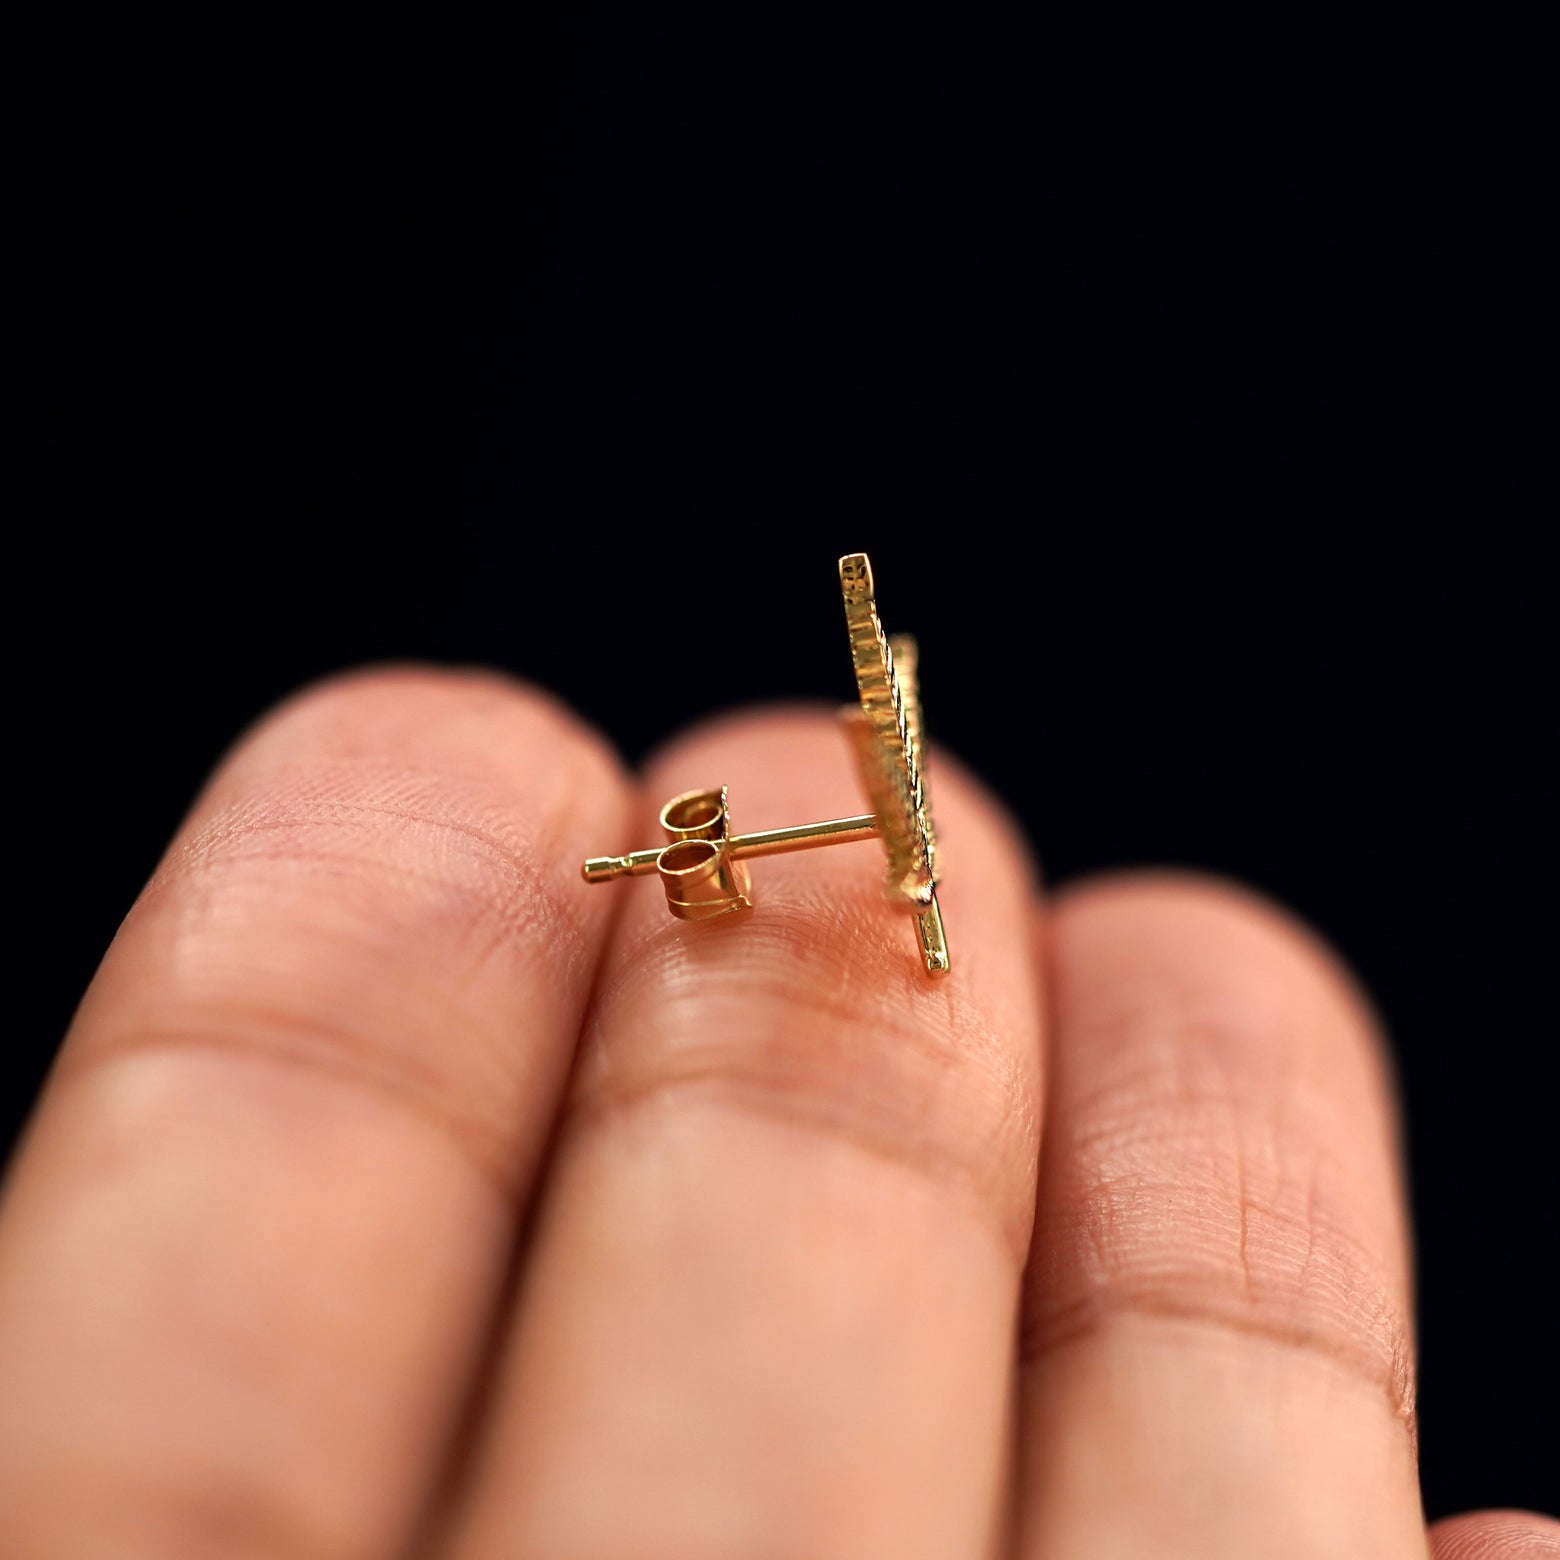 A 14k gold Cannabis Earring sitting sideways on a model's fingertips to show detail